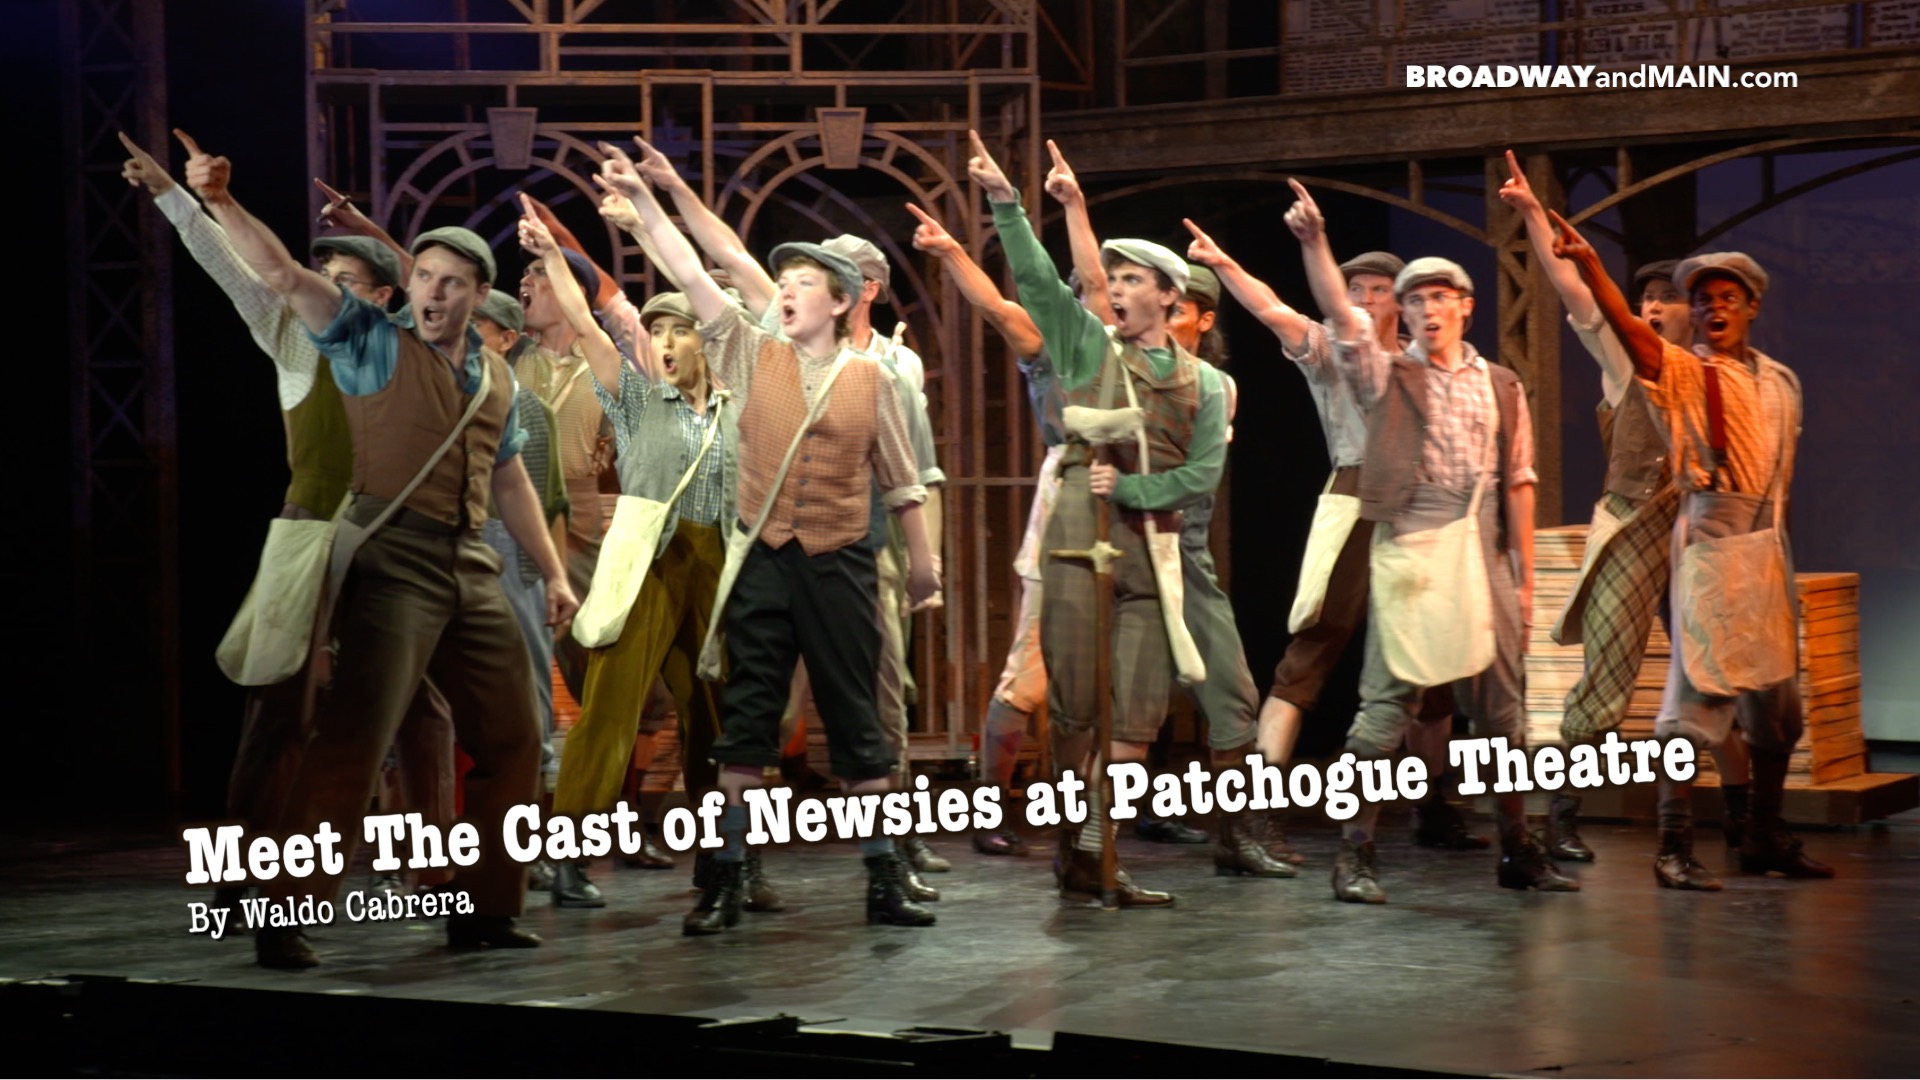 Meet The Cast of Newsies at the Patchogue Theatre